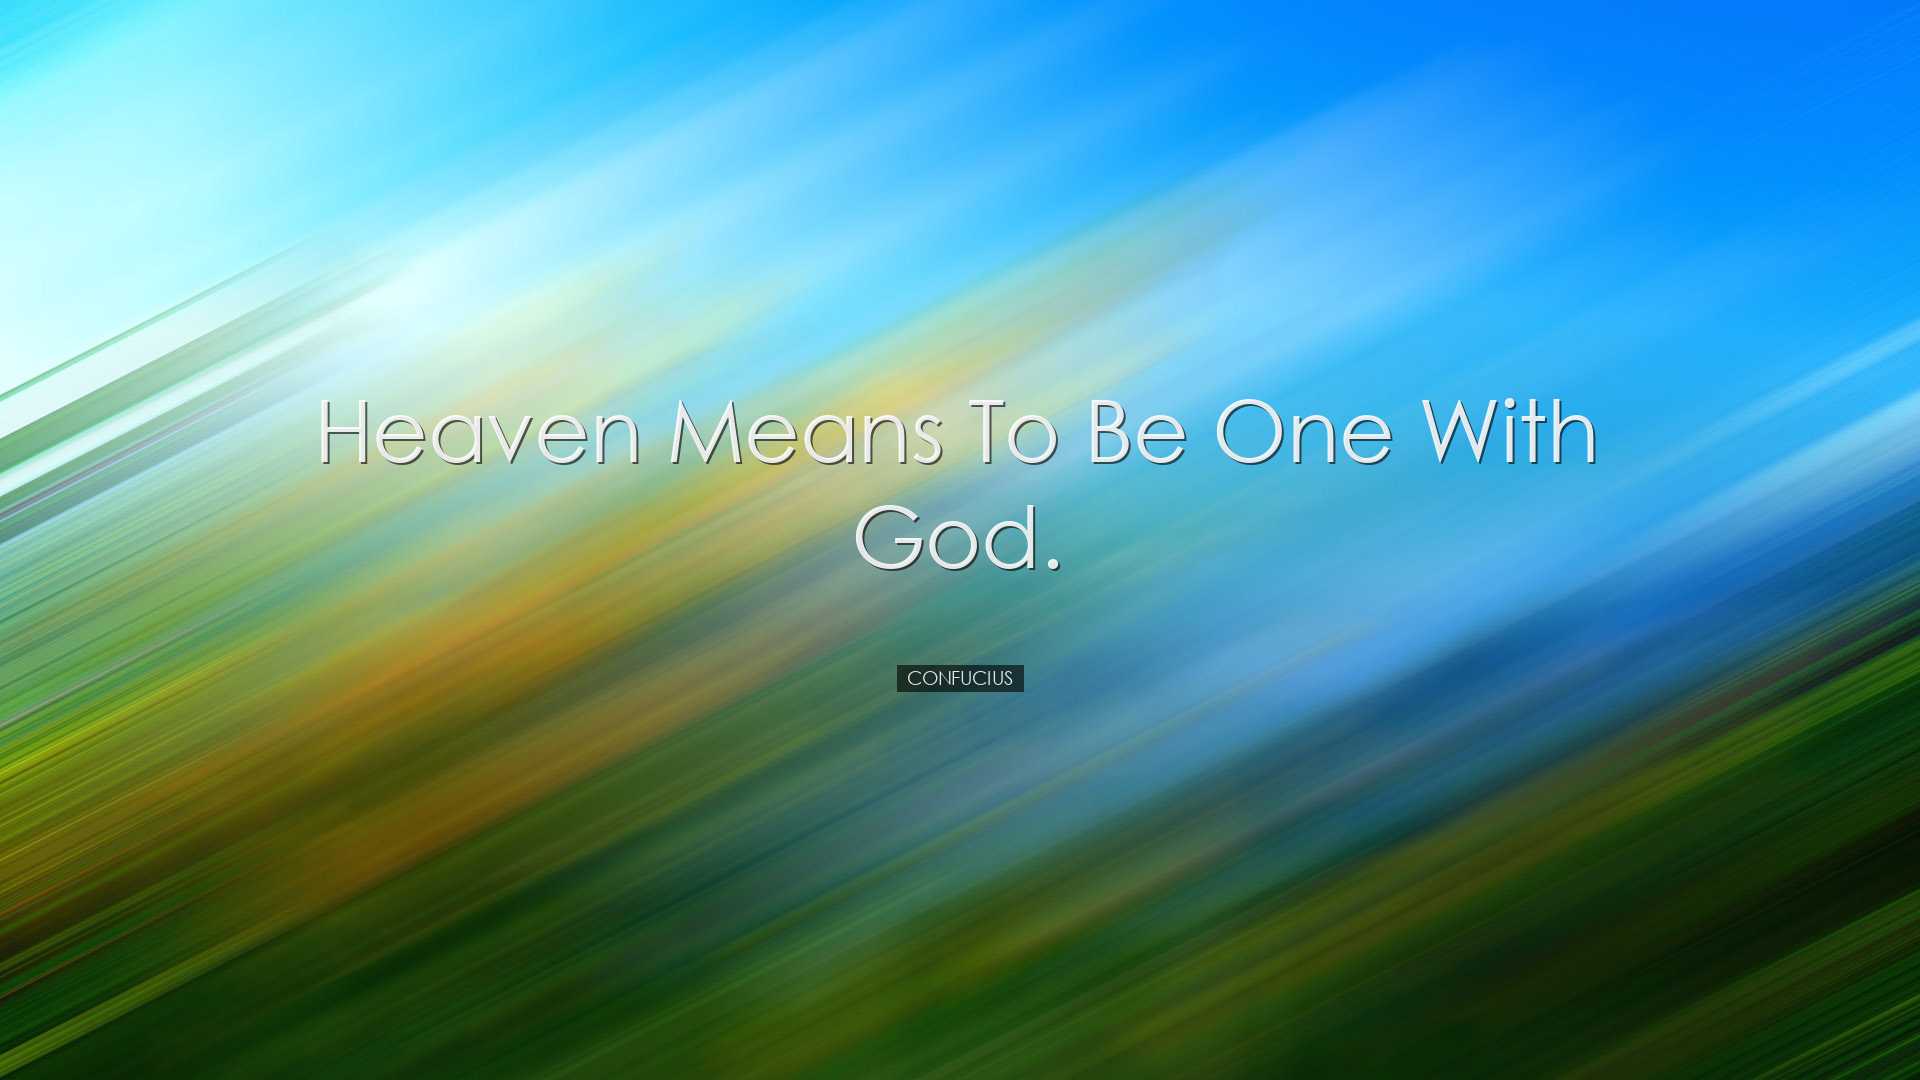 Heaven means to be one with God. - Confucius